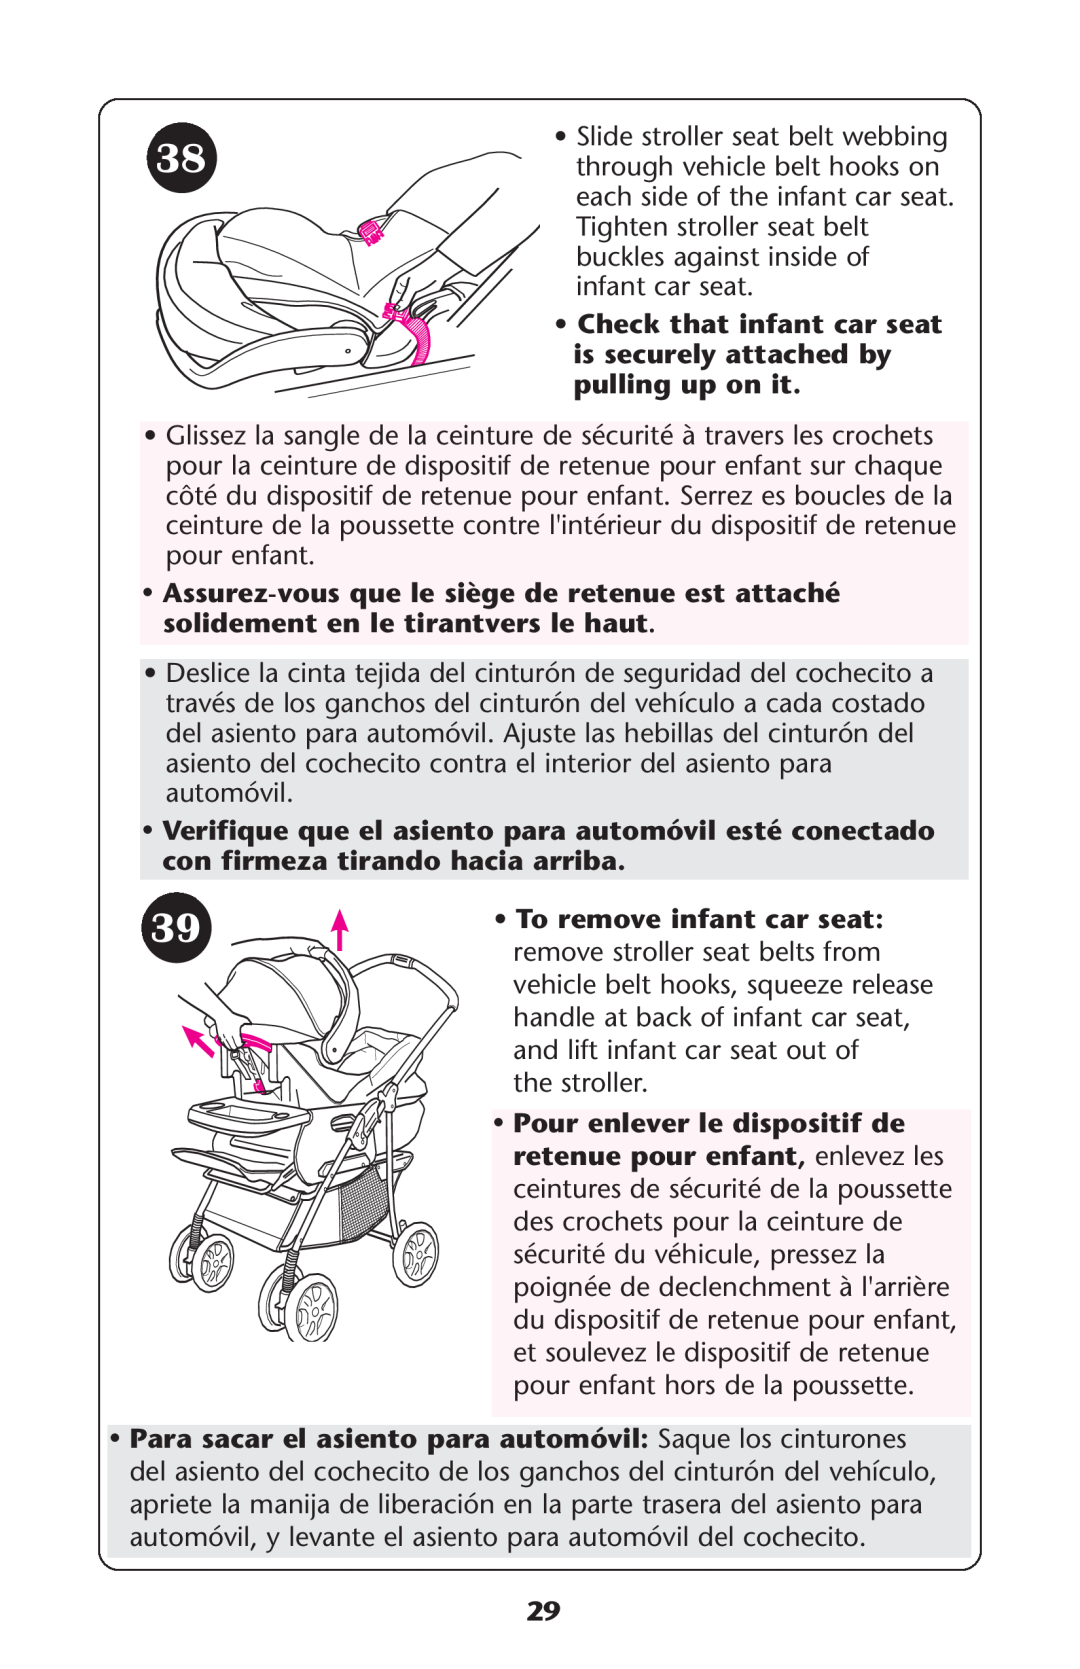 Graco ISPA108AB Check that infant car seat, is securely attached by, pulling up on it, con firmeza tirando hacia arriba 